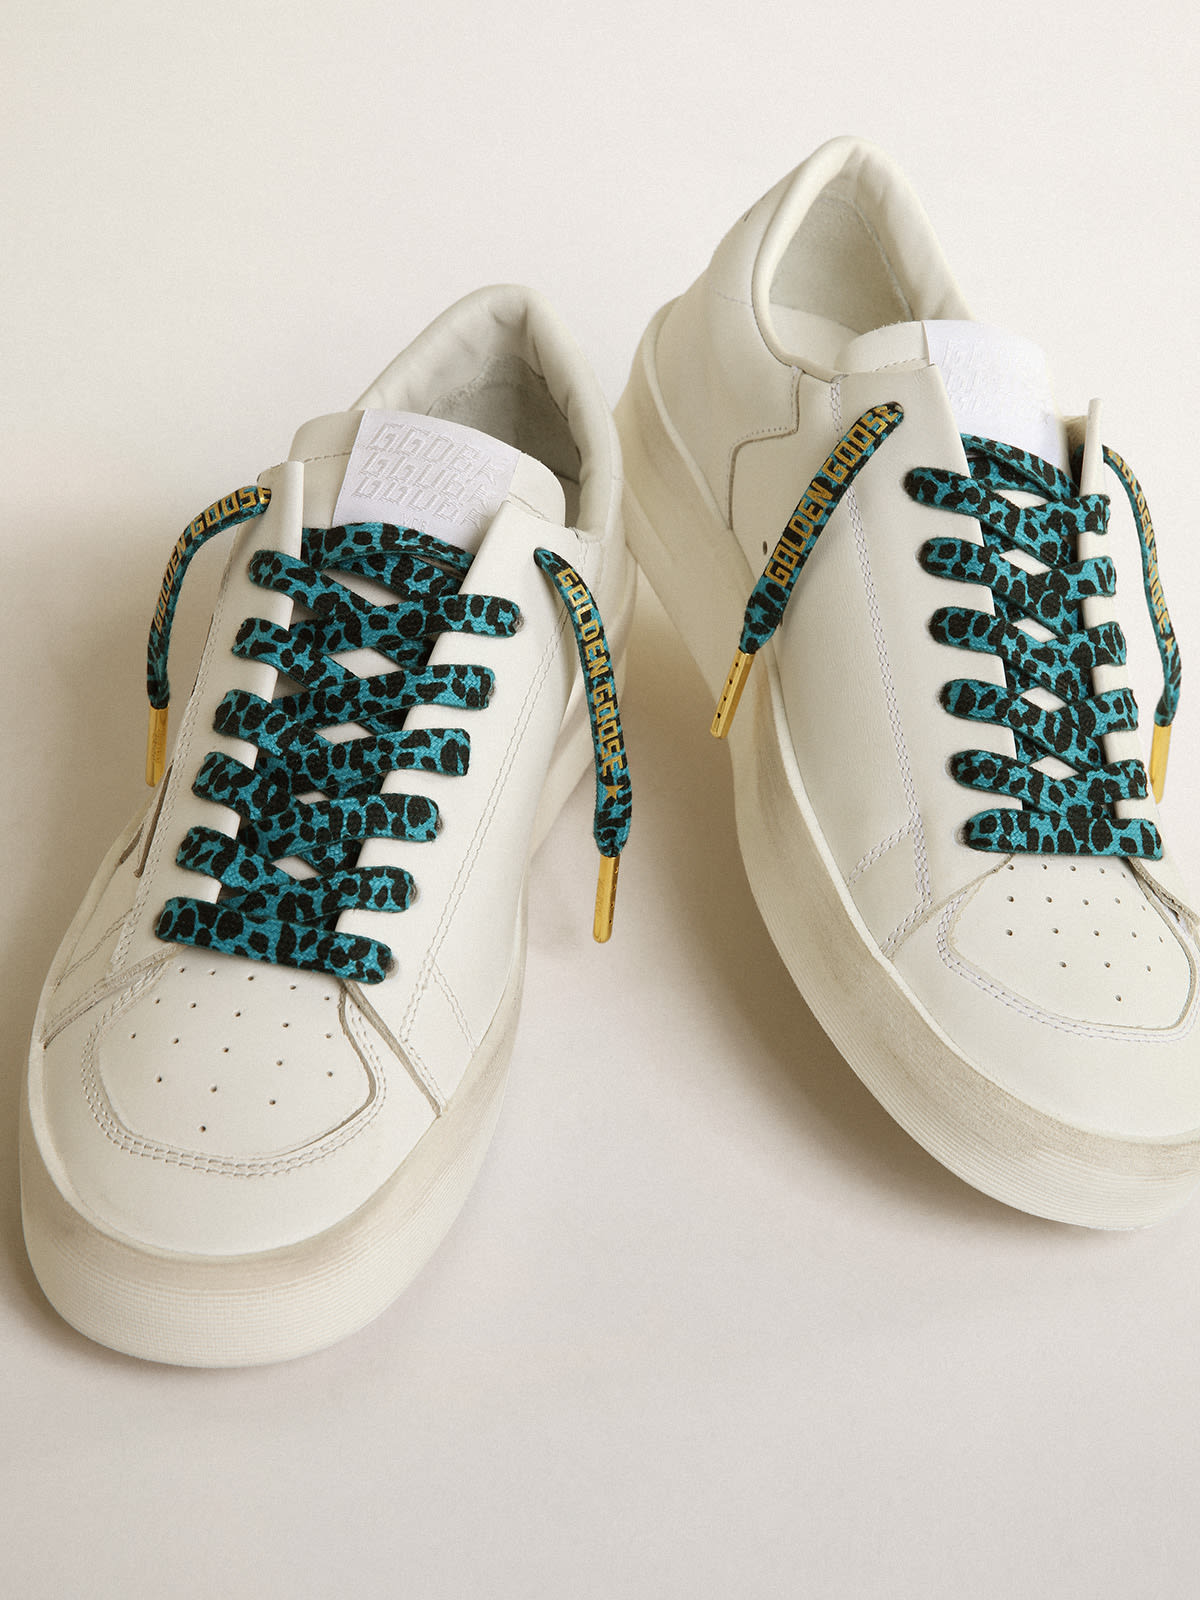 Golden Goose - Light blue and black animal-print laces with contrasting gold-colored logo in 